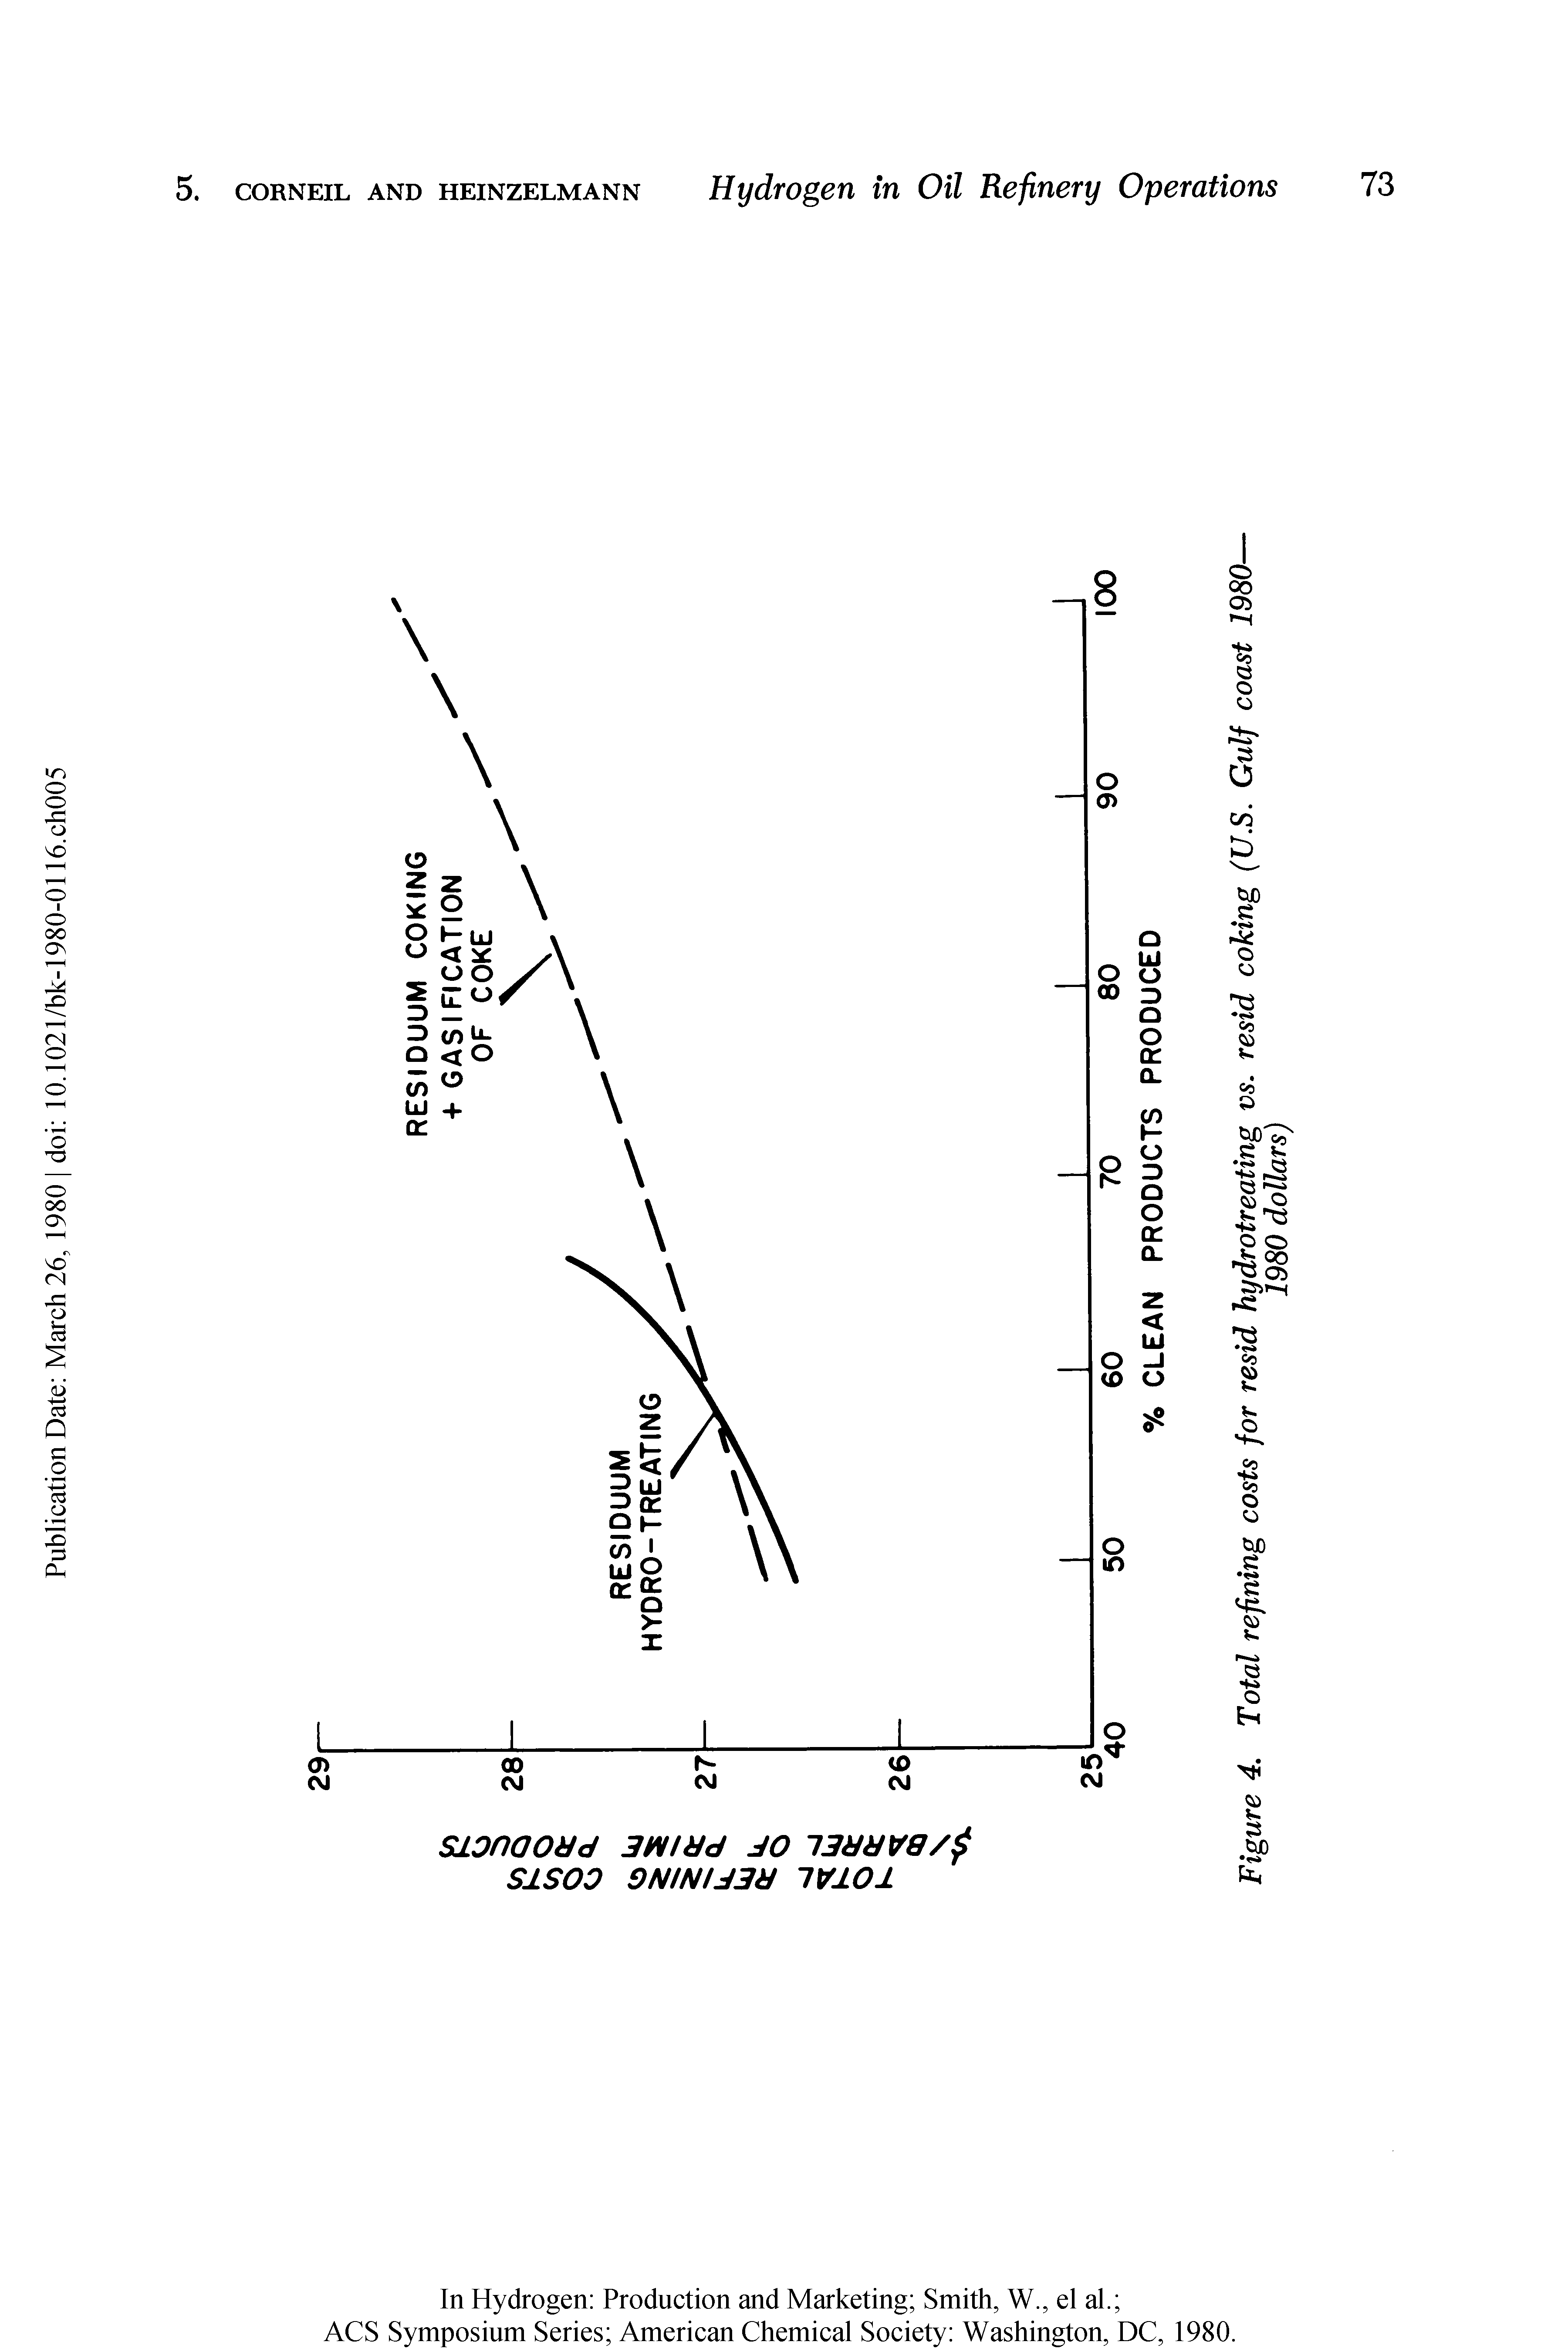 Figure 4. Total refining costs for resid hydrotreating vs. resid coking (U.S. Gulf coast 1980-...